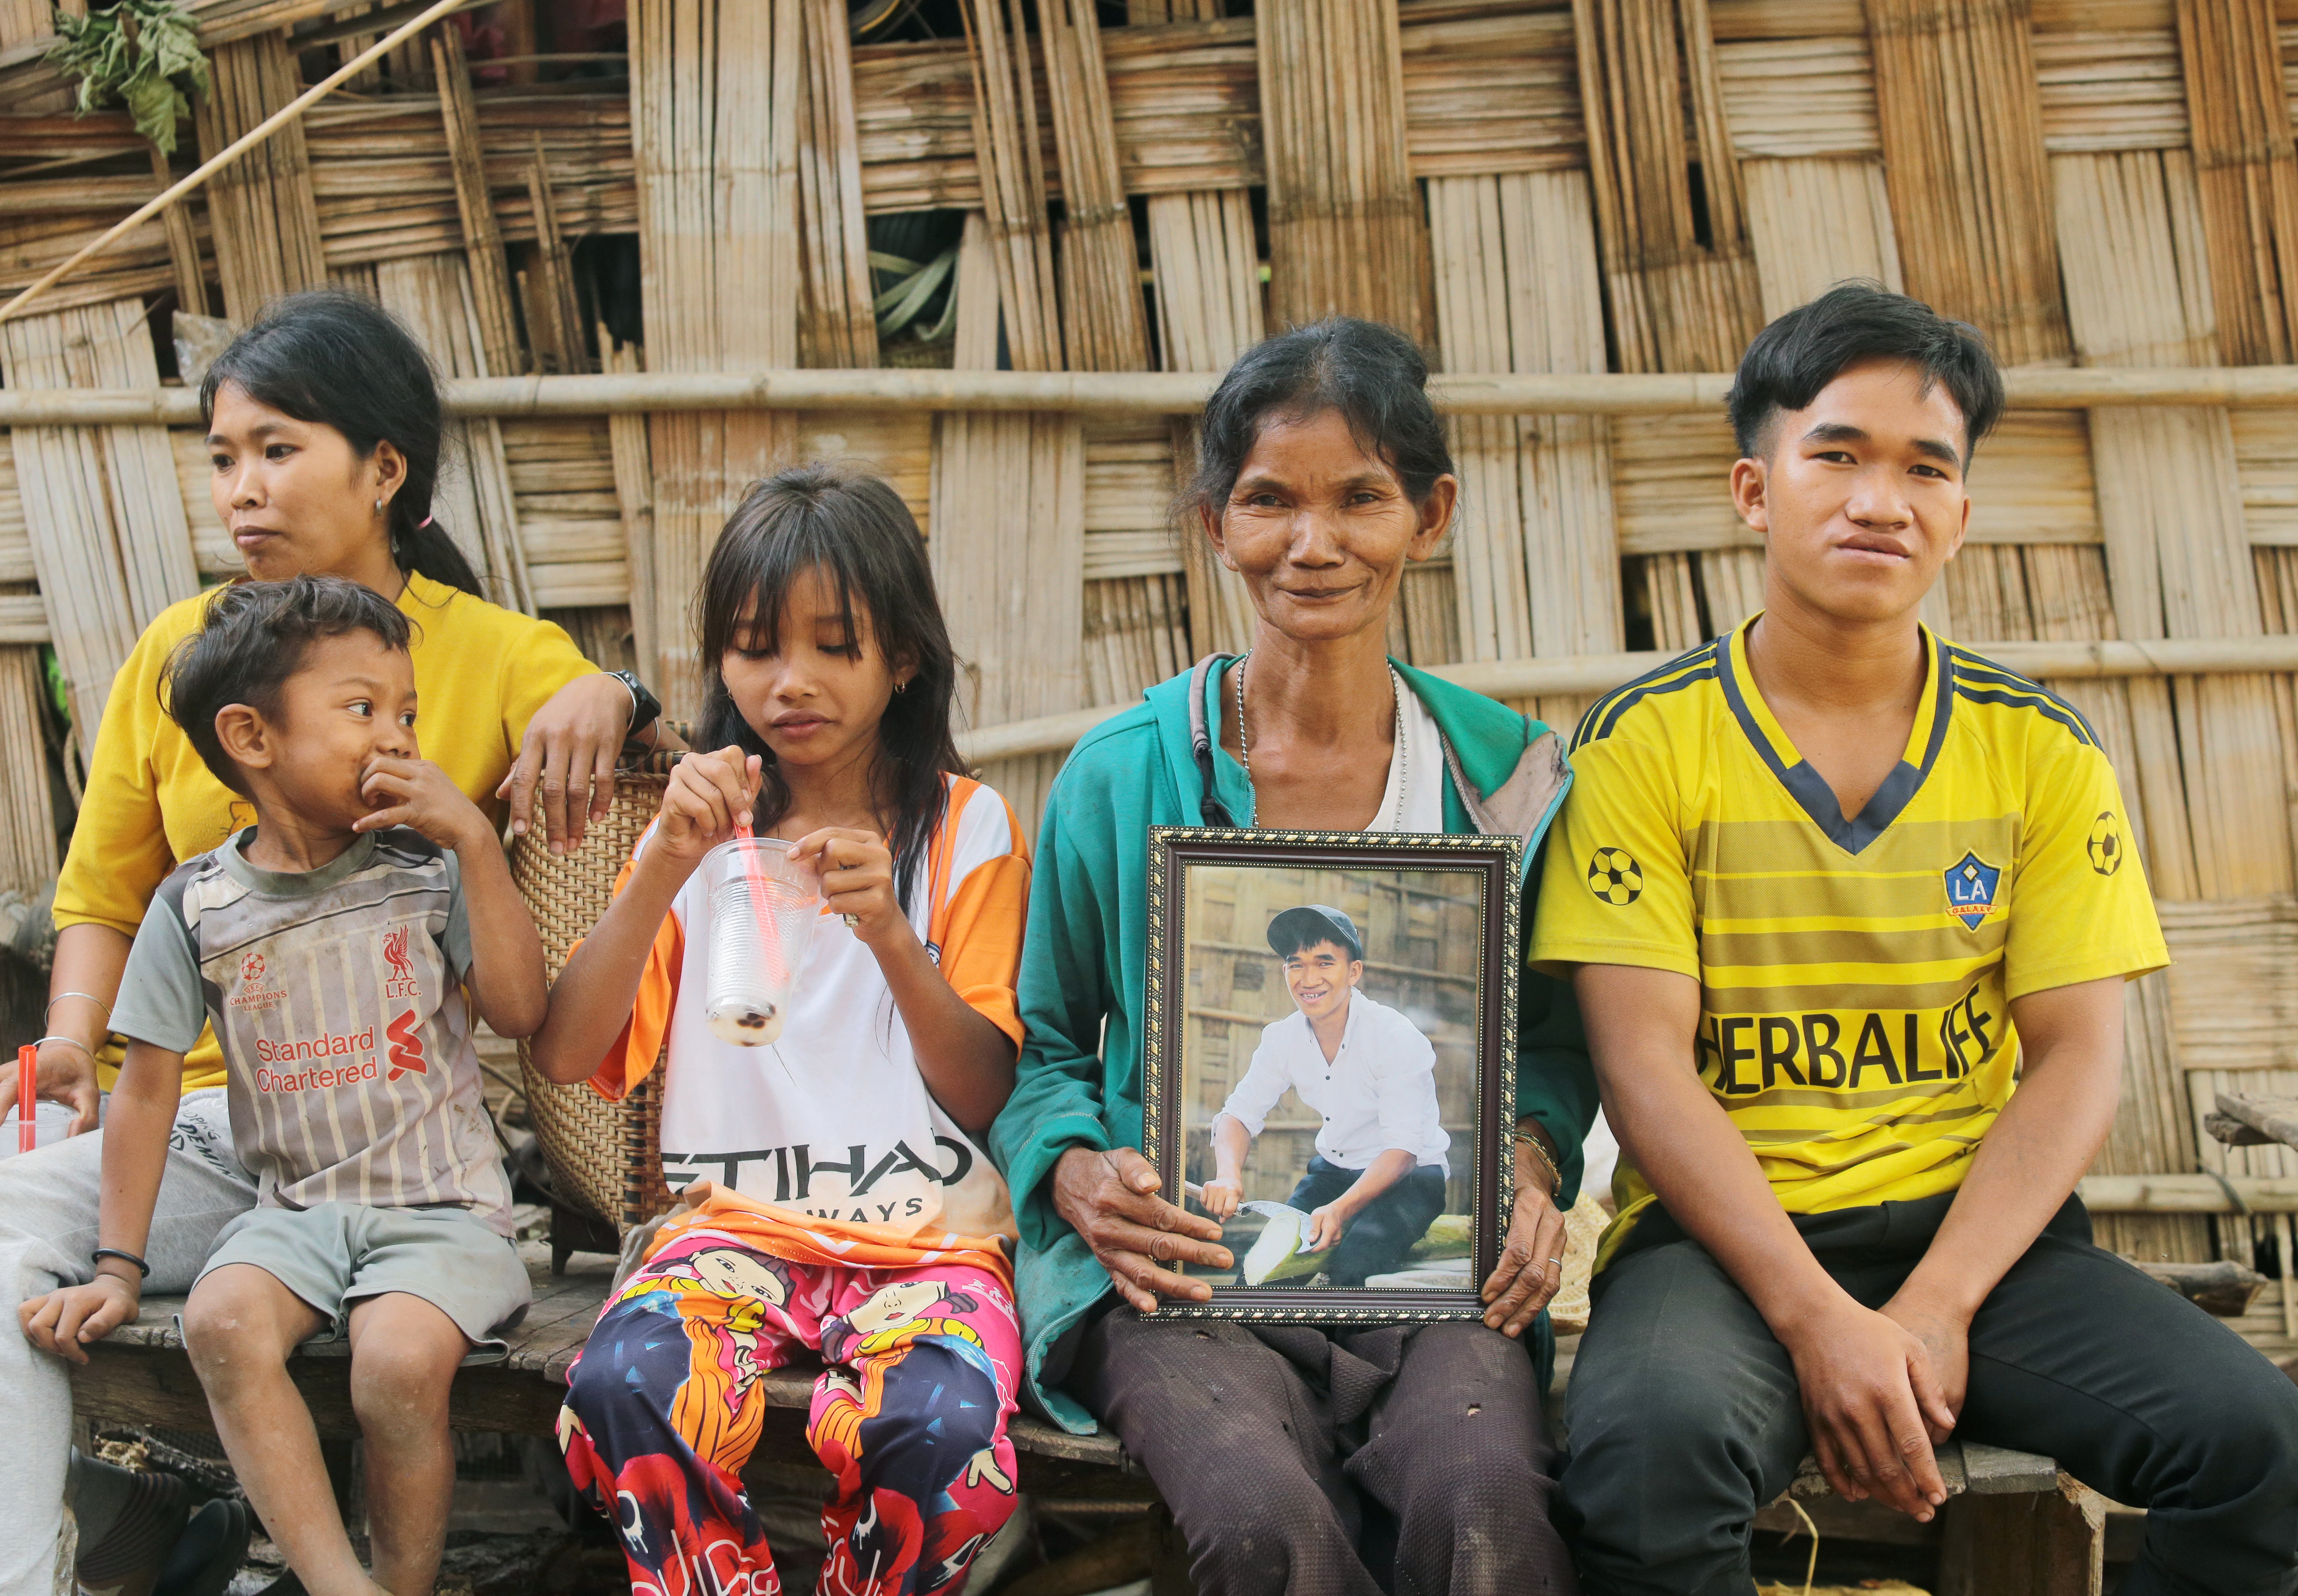 Ray and his family sitting. His mother is holding a framed photo of him after cleft surgery